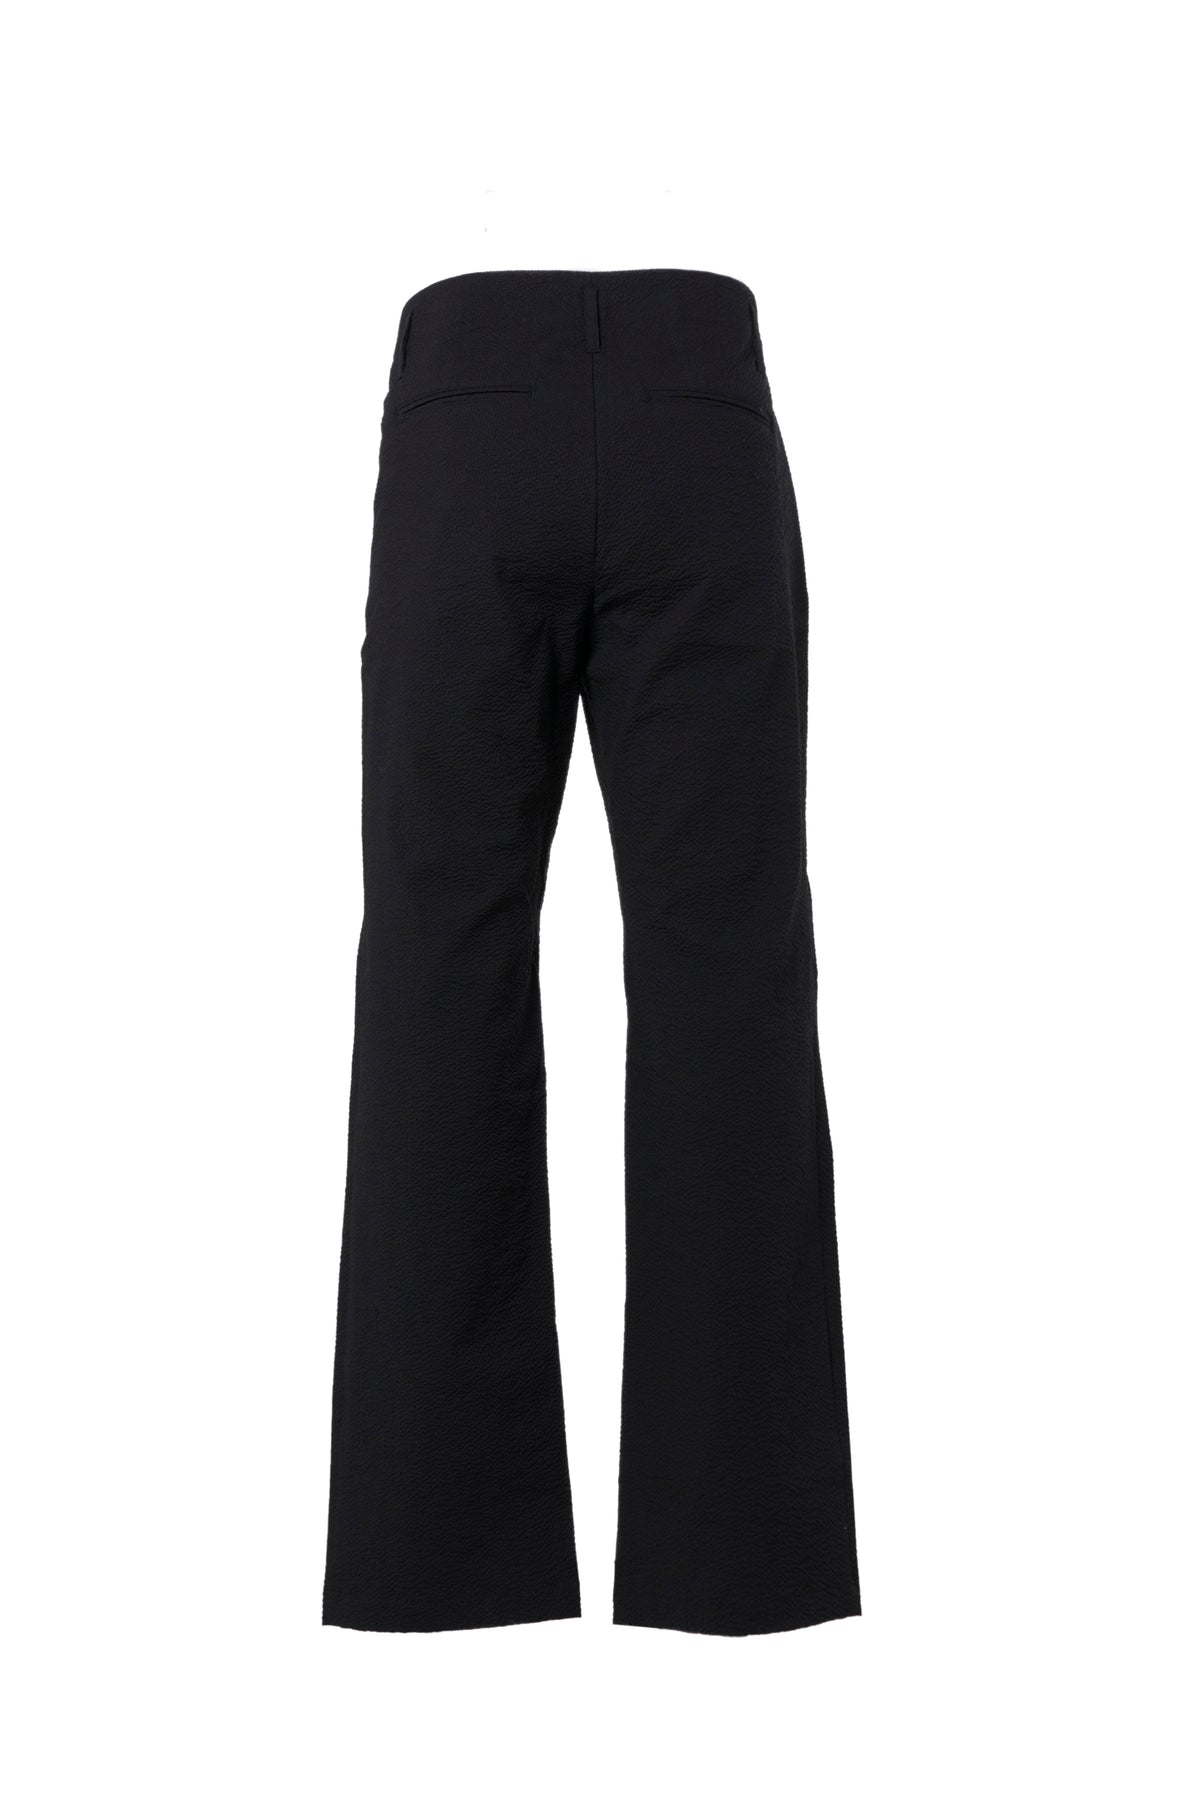 5.0+ TROUSERS RIGHT / BLK